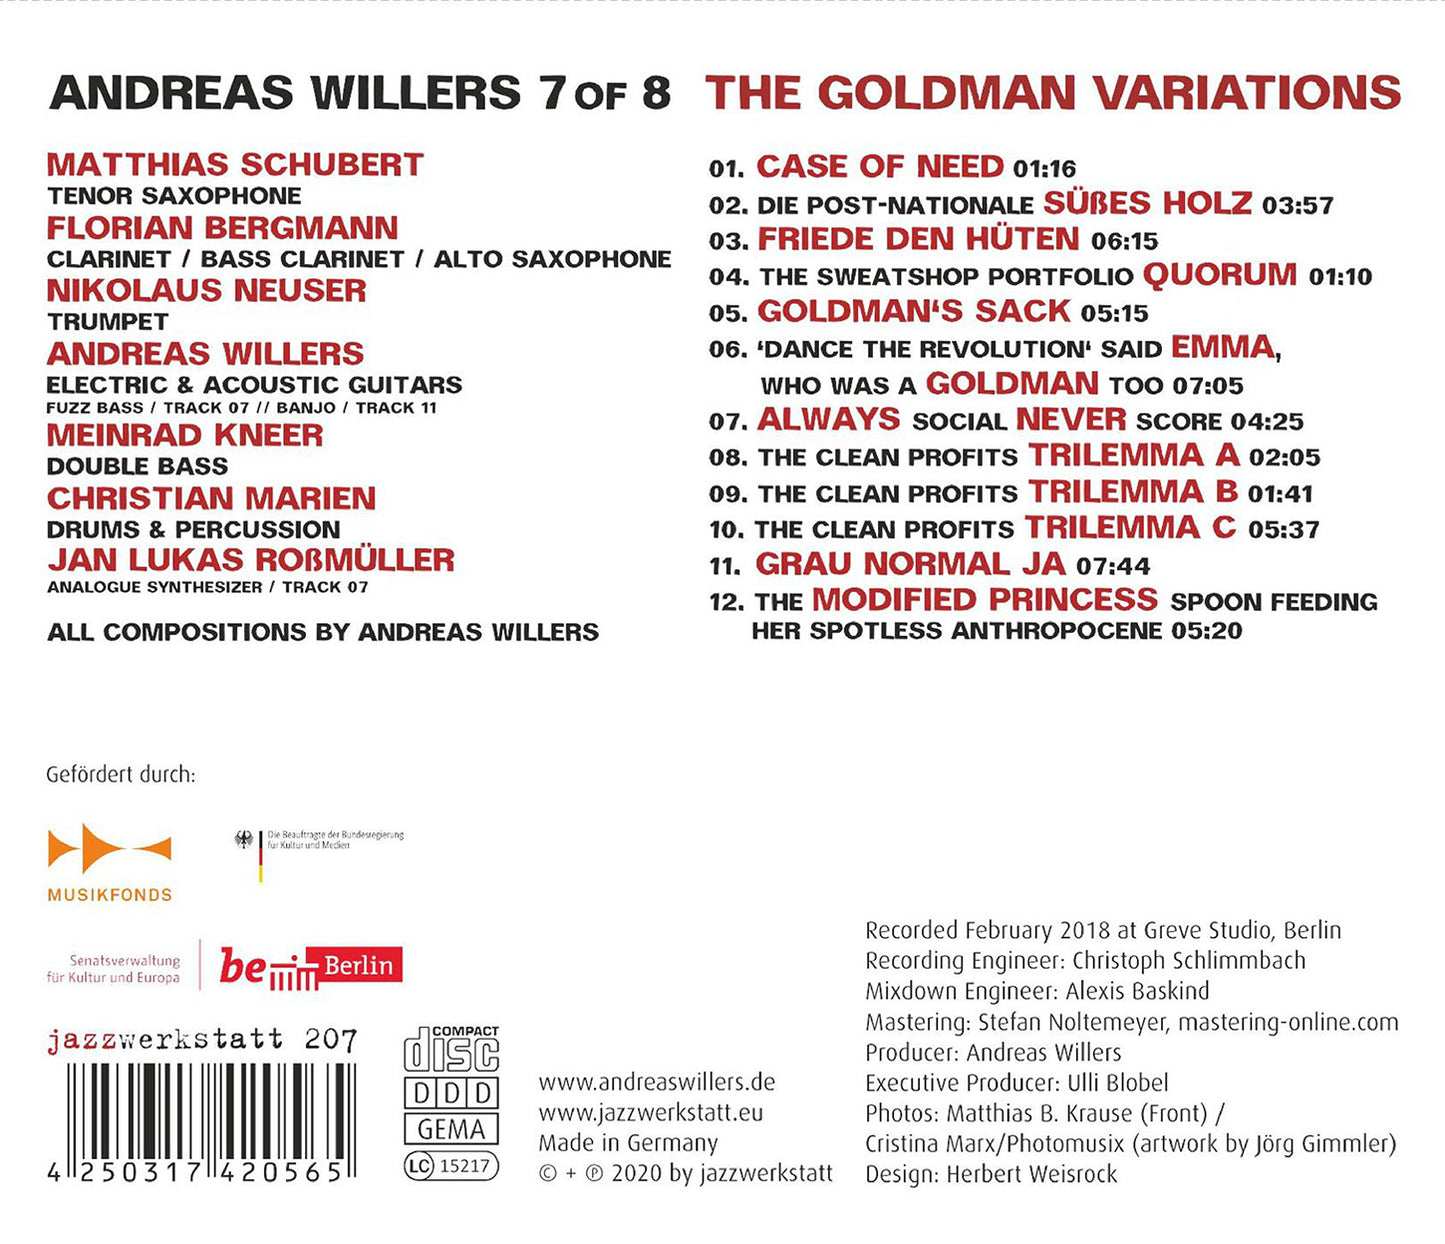 Willers: The Goldman Variations - 7 Of 8